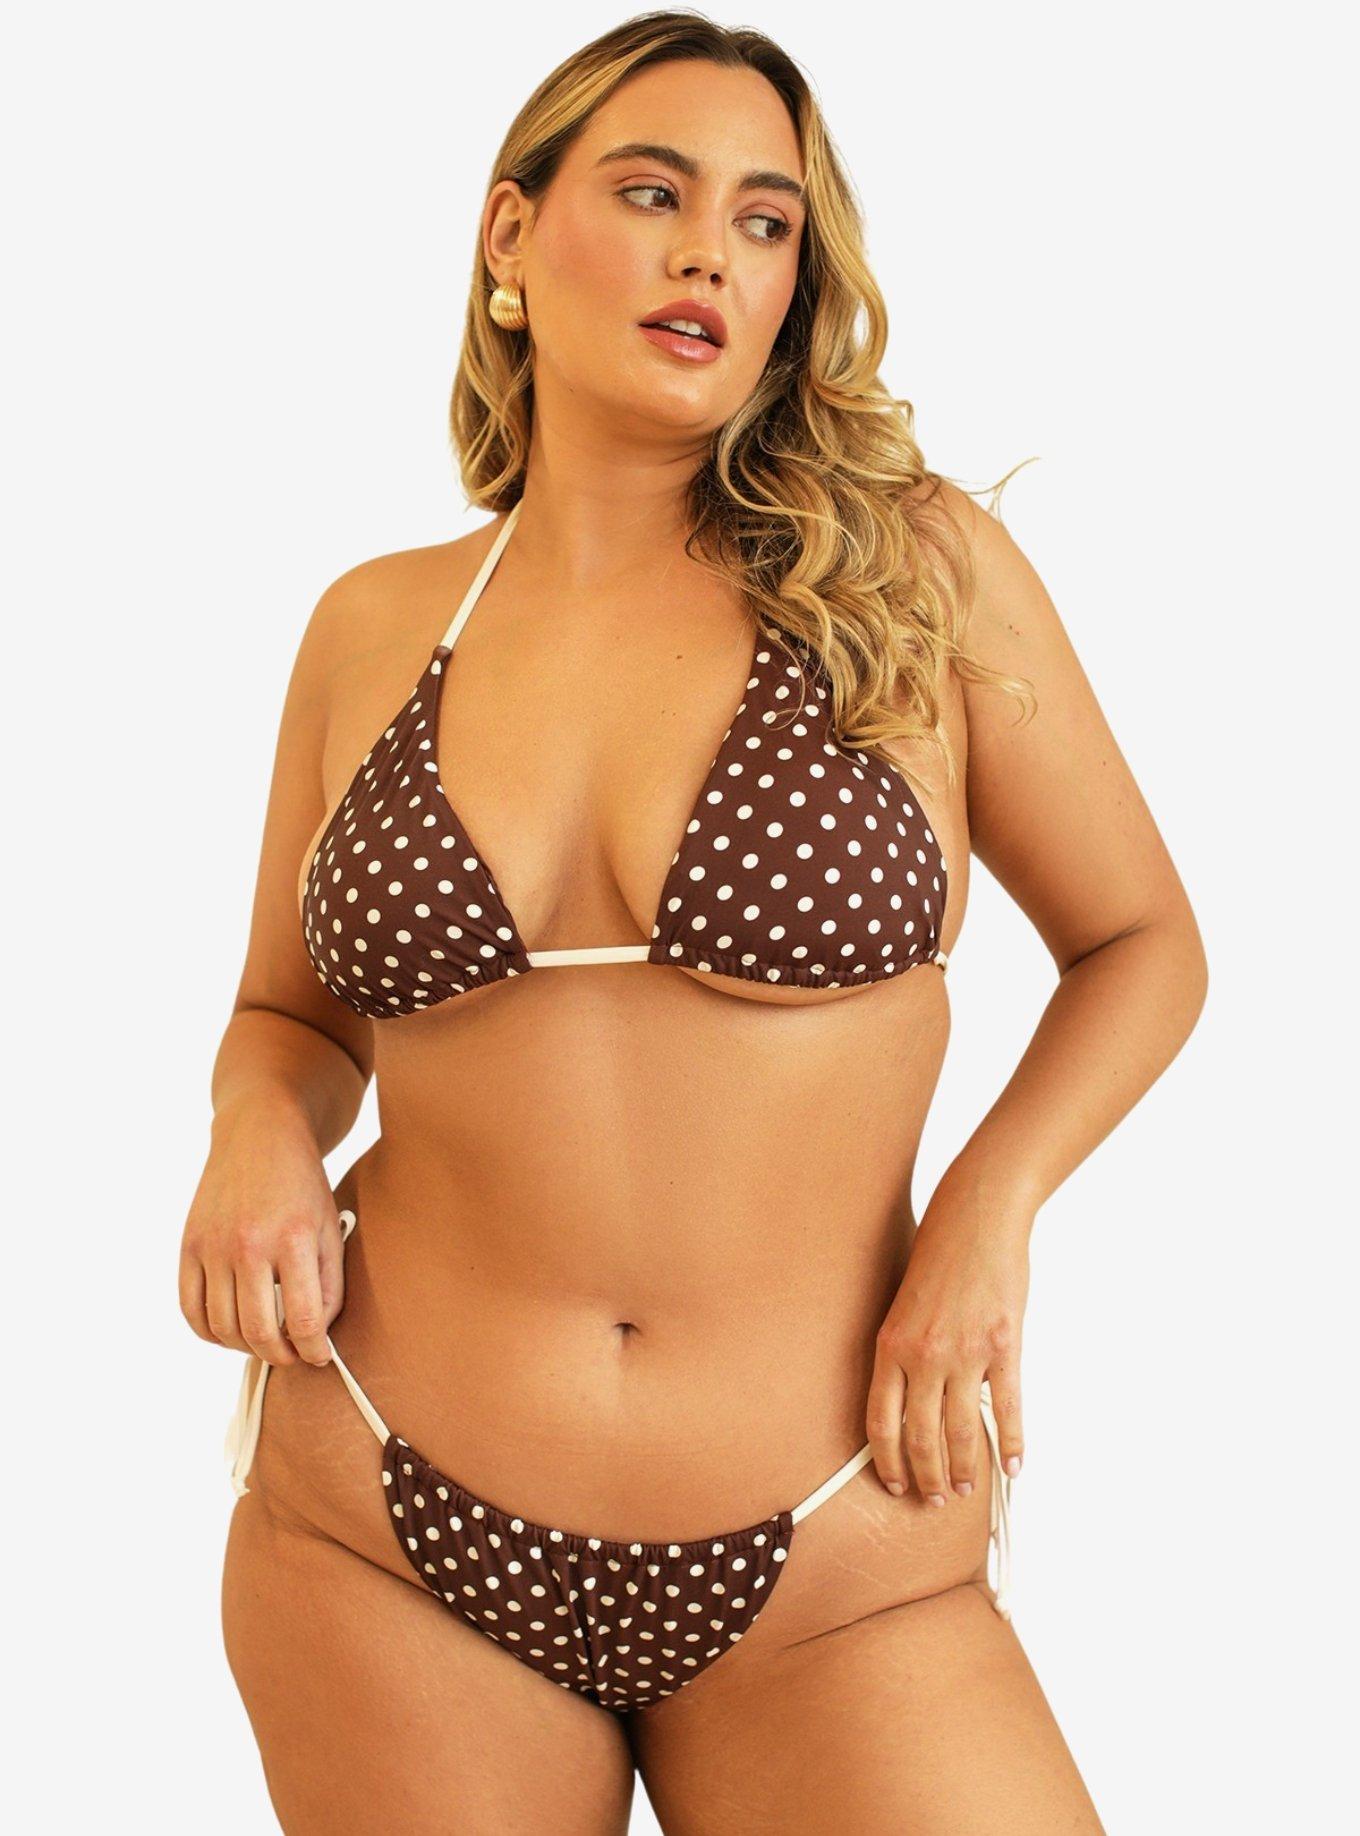 Dippin' Daisy's Paris Cheeky Swim Bottom Dotted Brown, , hi-res